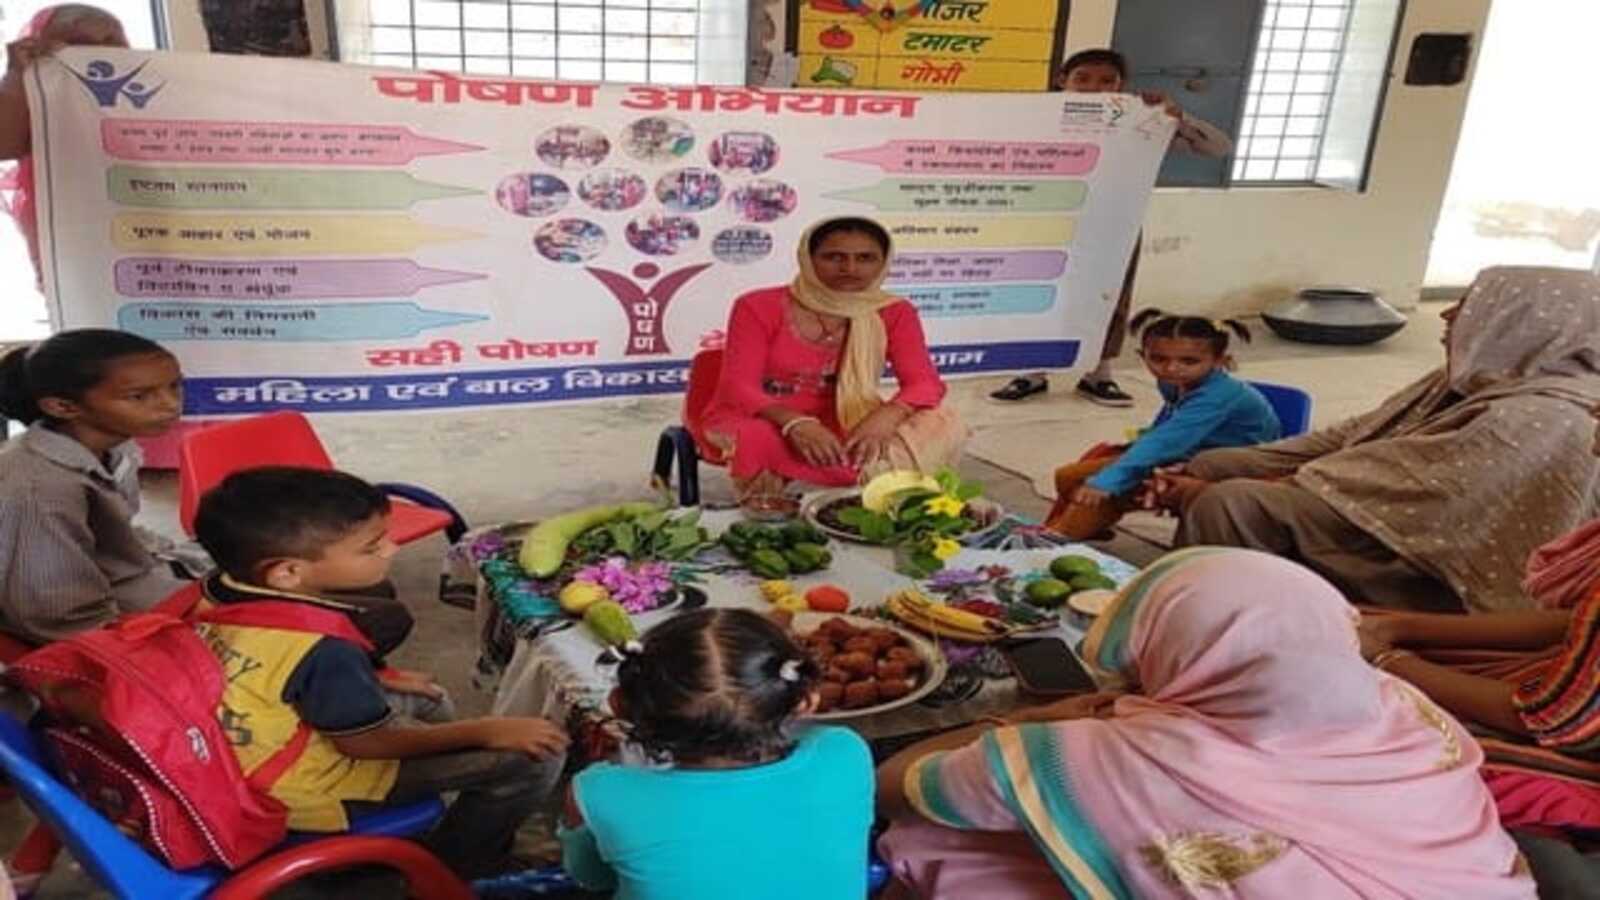 Nutrition Month: Competition for increasing health awareness among kids in Prayagraj